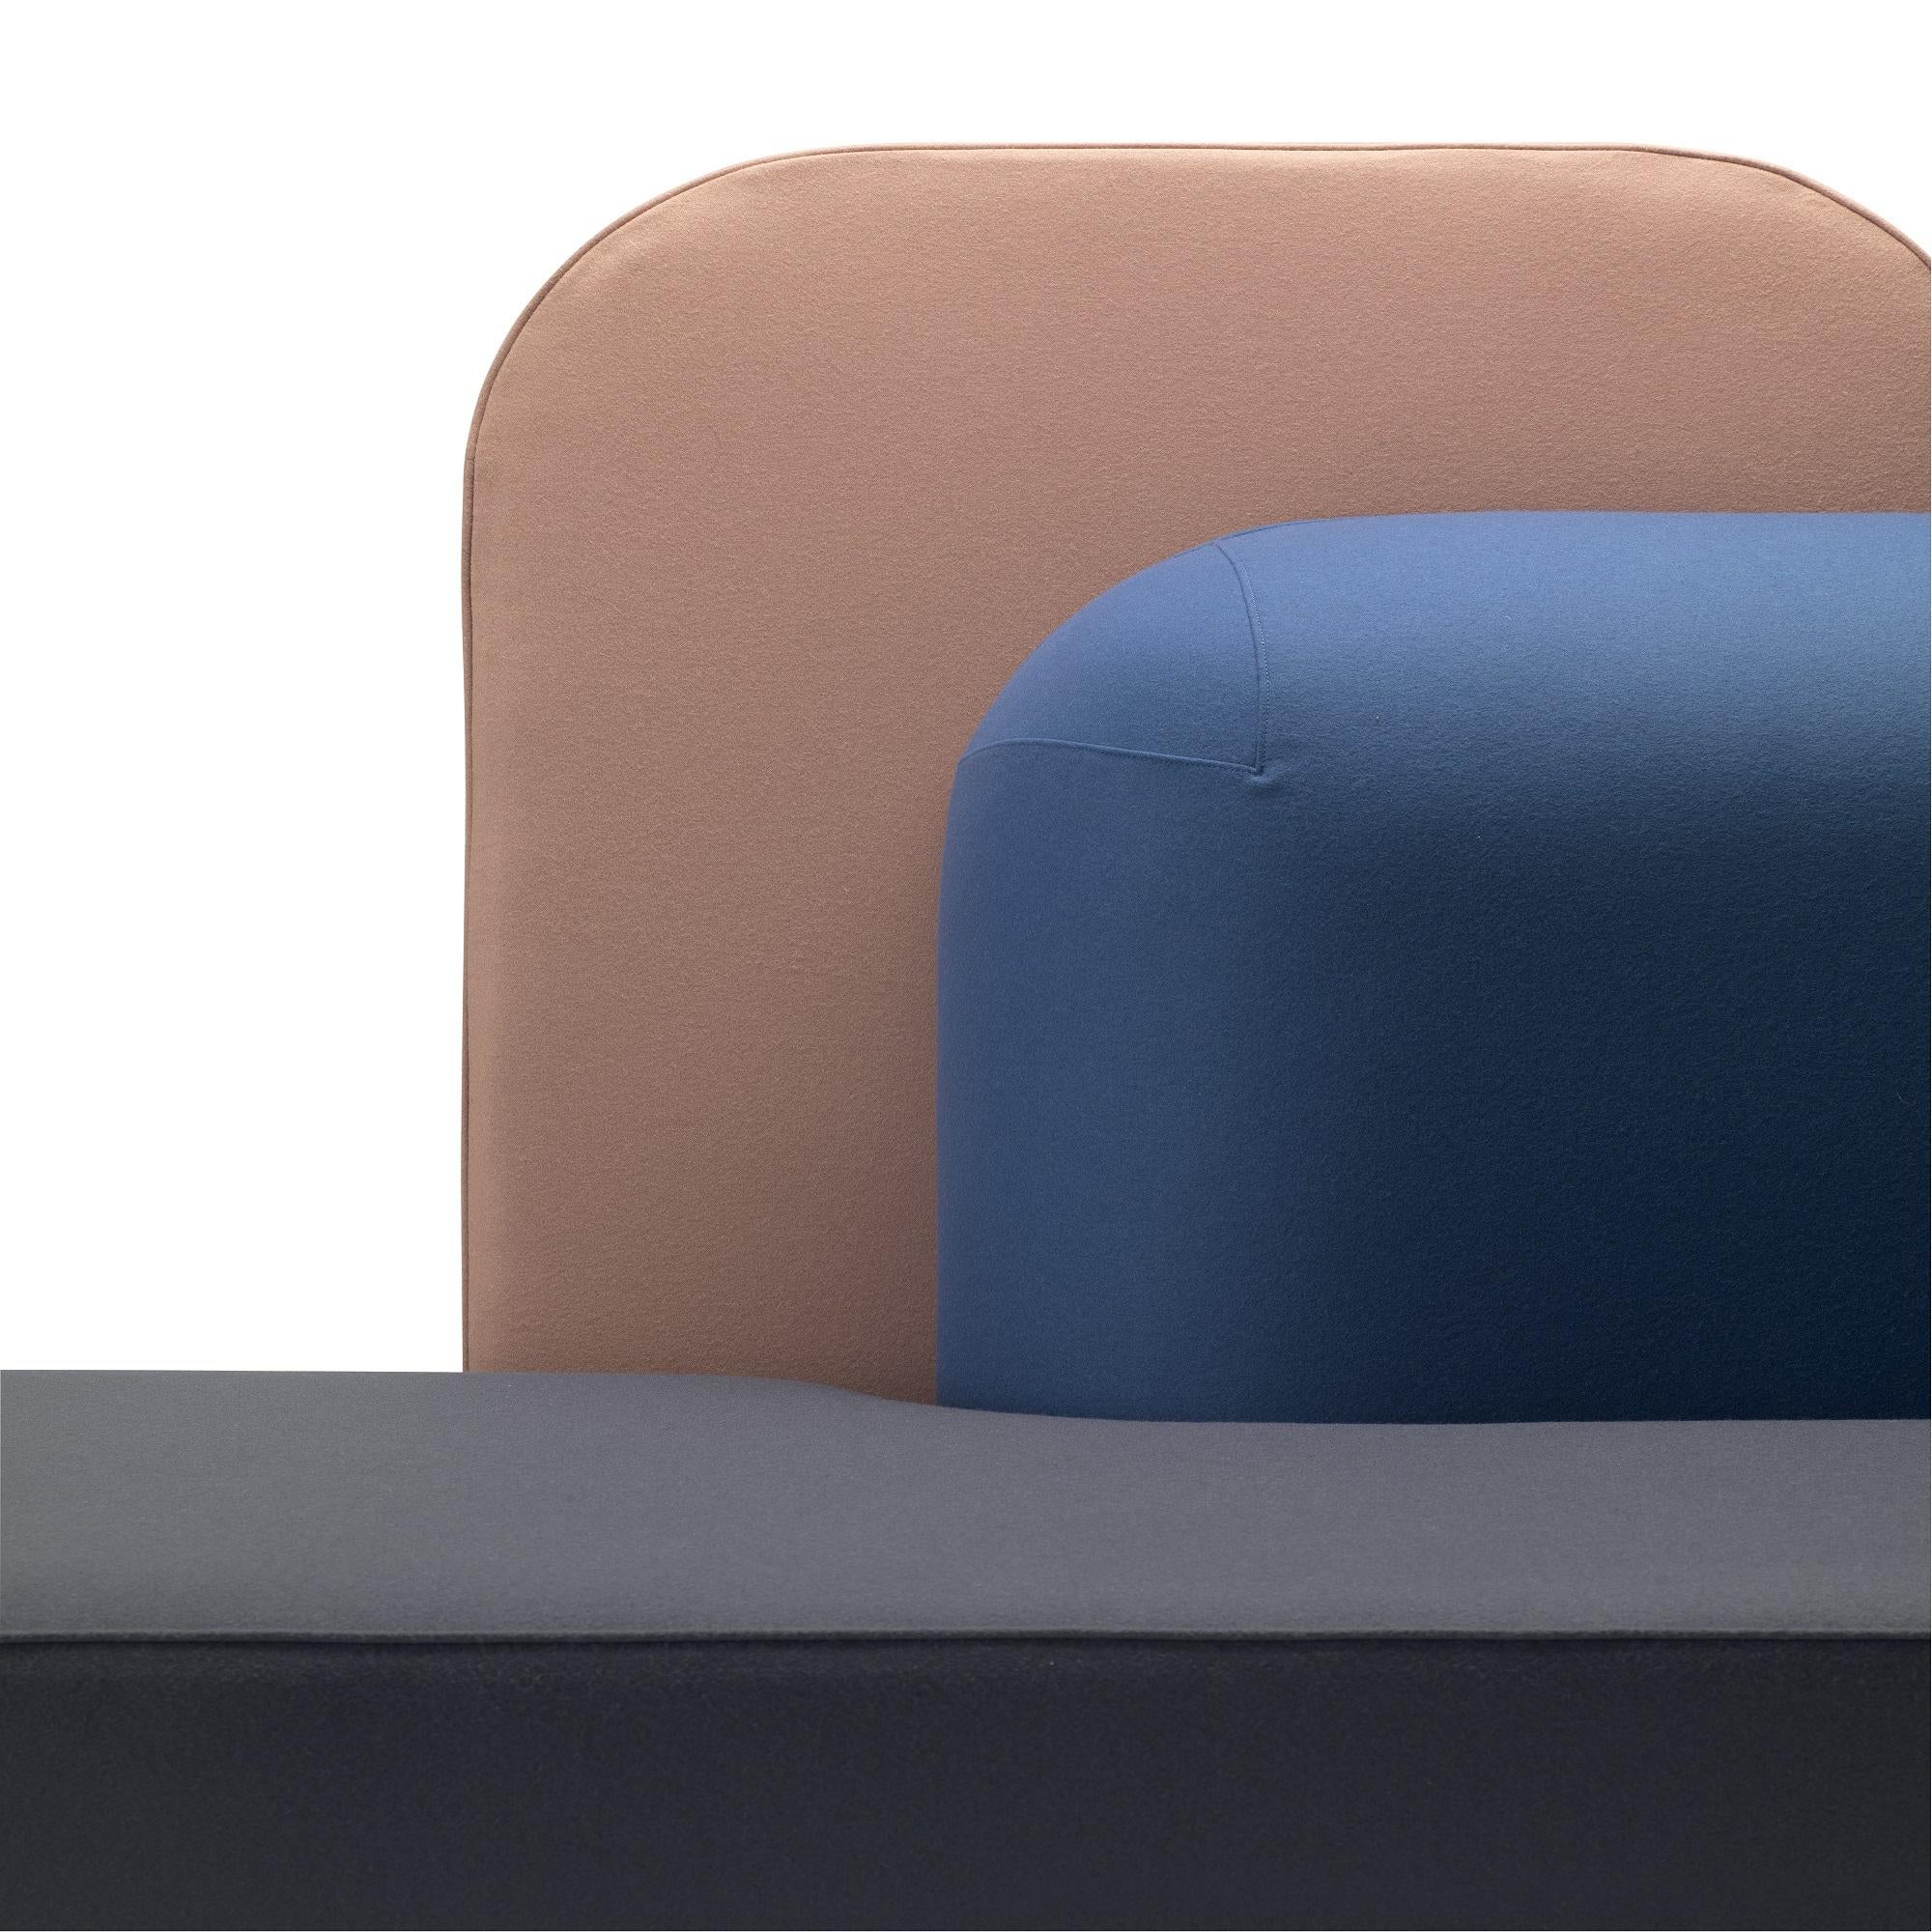 Alias Okome 004 Upholstered Seat with Backrest by Nendo

Seat composition with seat and backrest with removable cover in eco-leather Serge Ferrari®, Alias®, Camira® or Kvadrat® fabric.OPTIONAL:Small table with drawer for cable management in